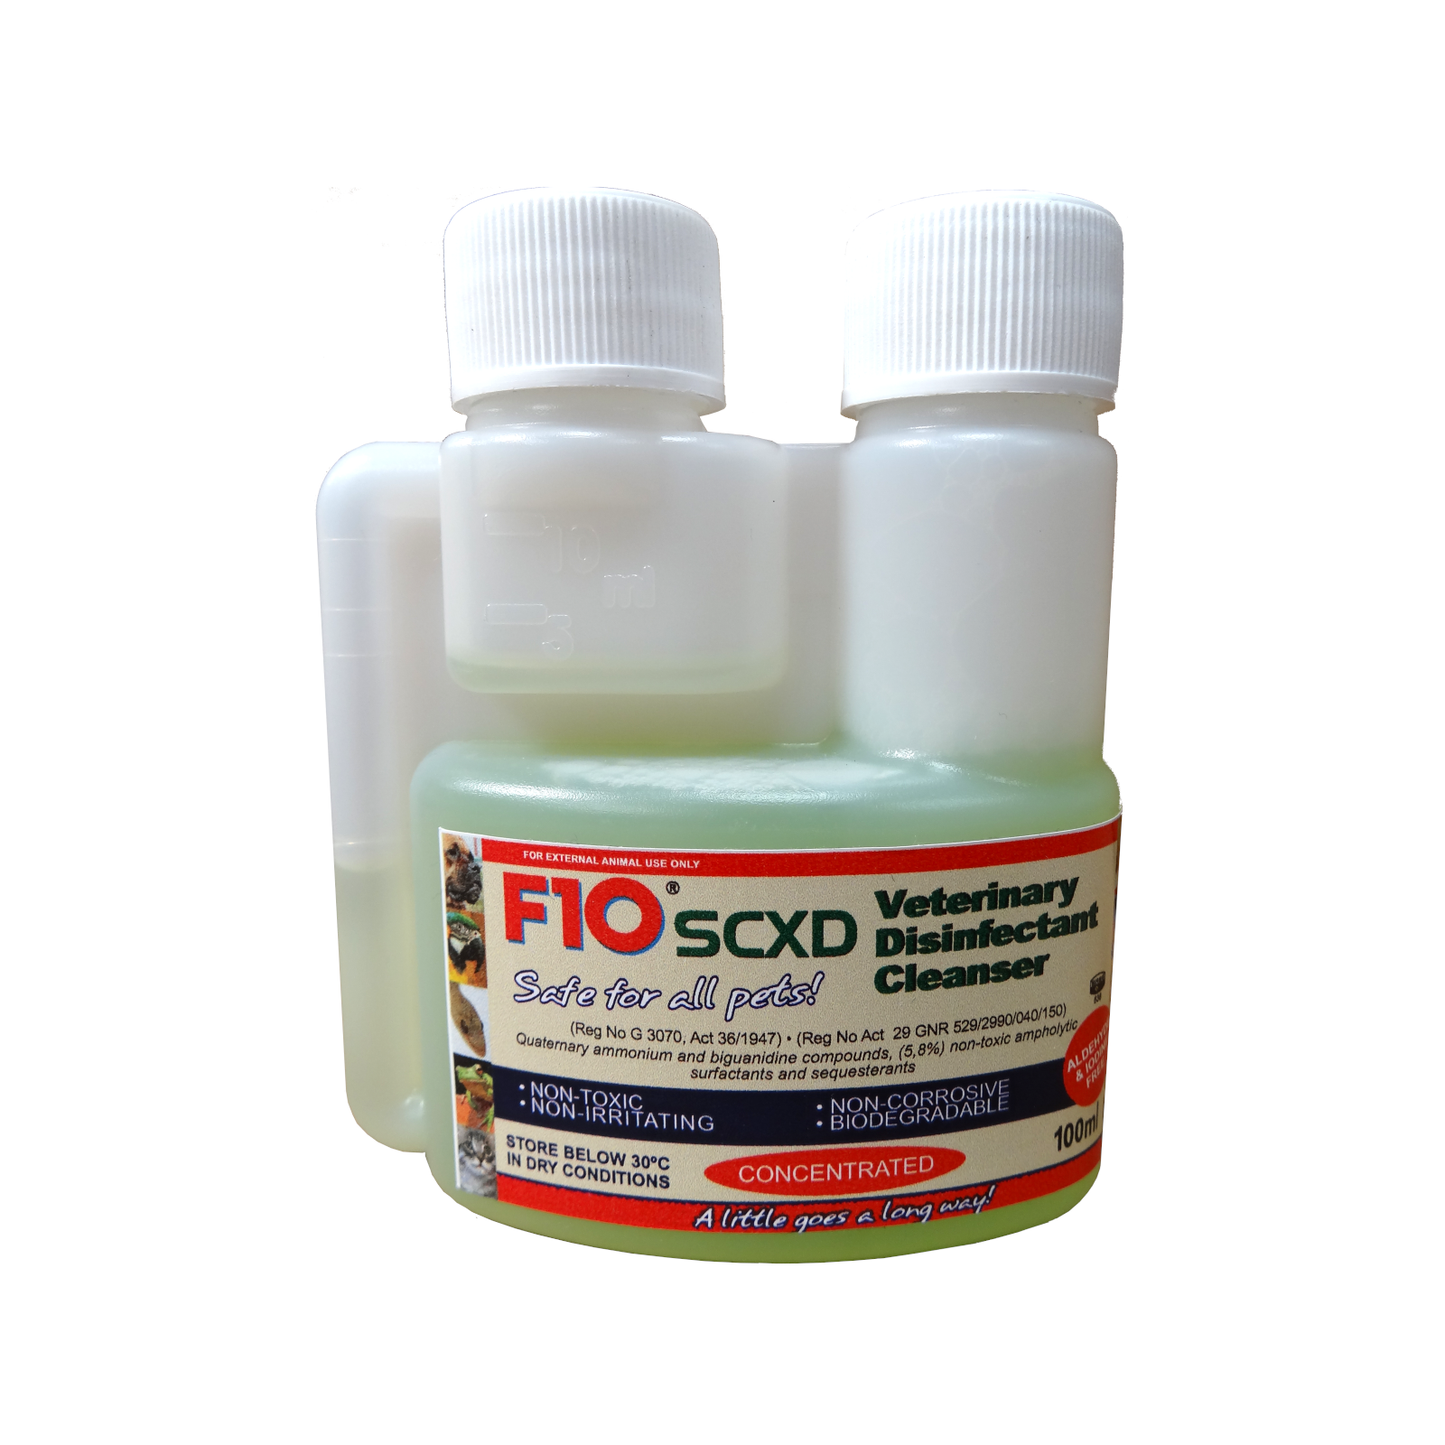 A 100ml bottle of F10SCXD Veterinary Disinfectant Cleanser